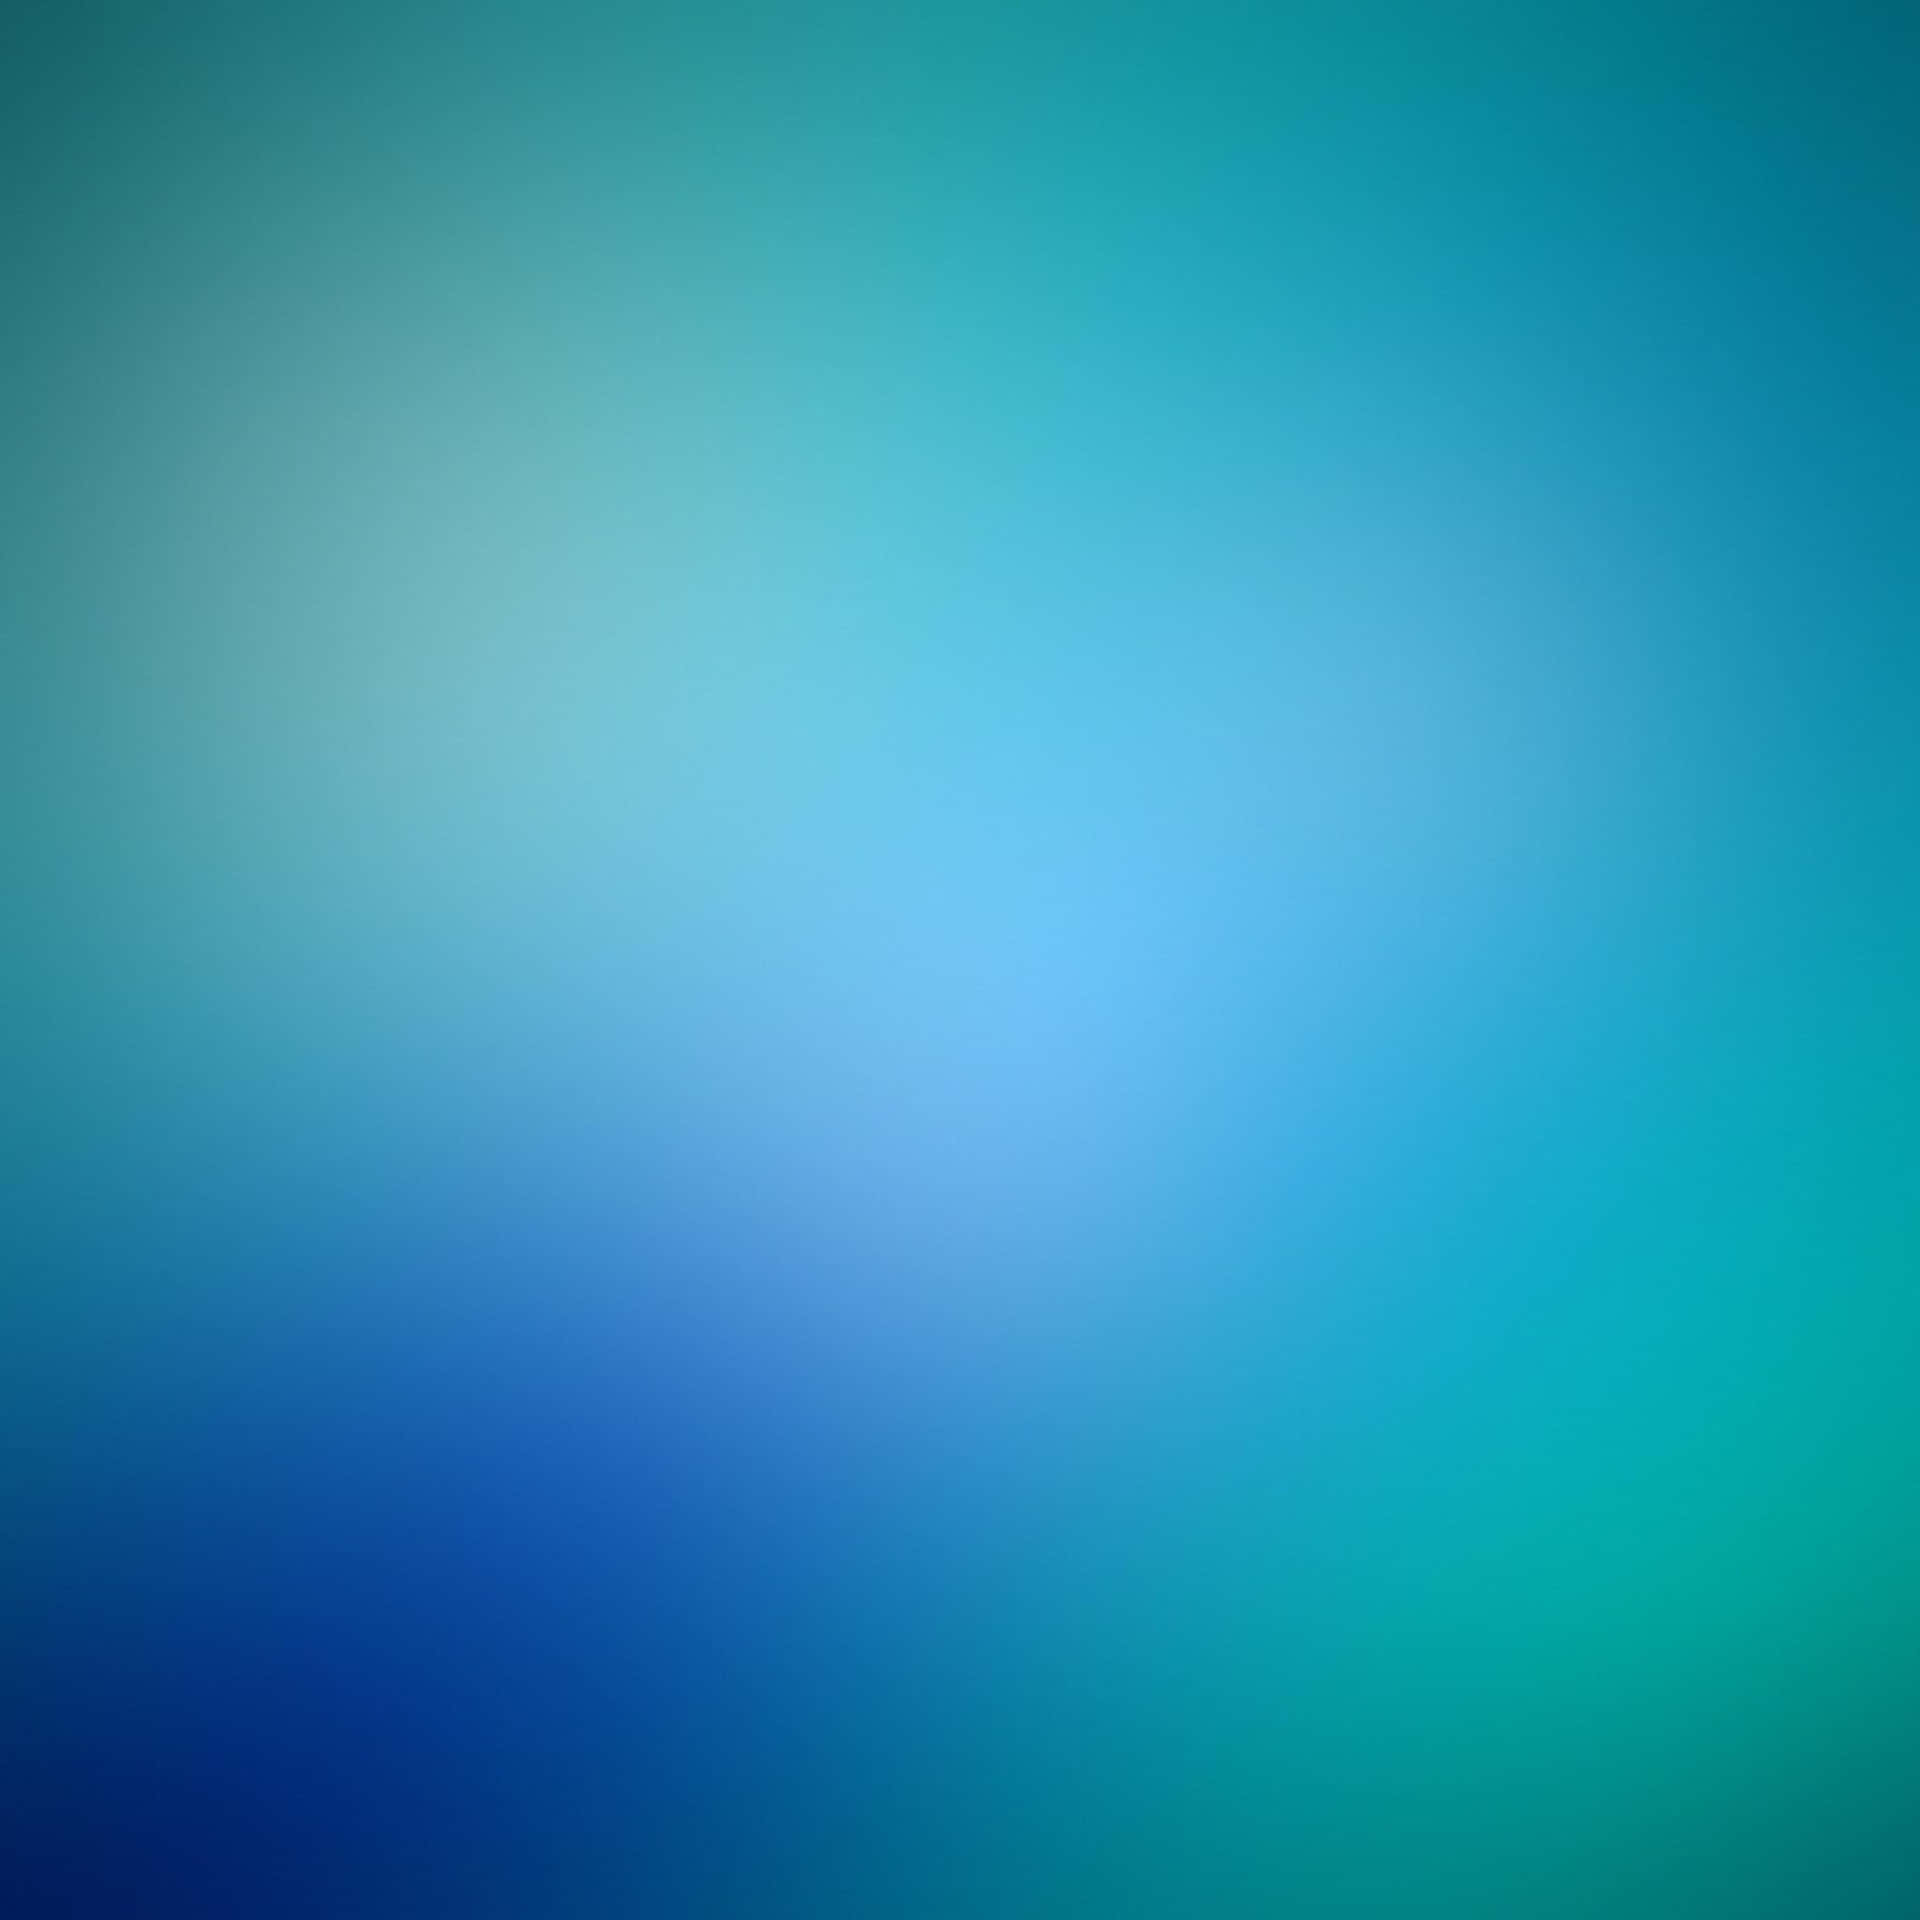 Solid Blue Green Gradient Background